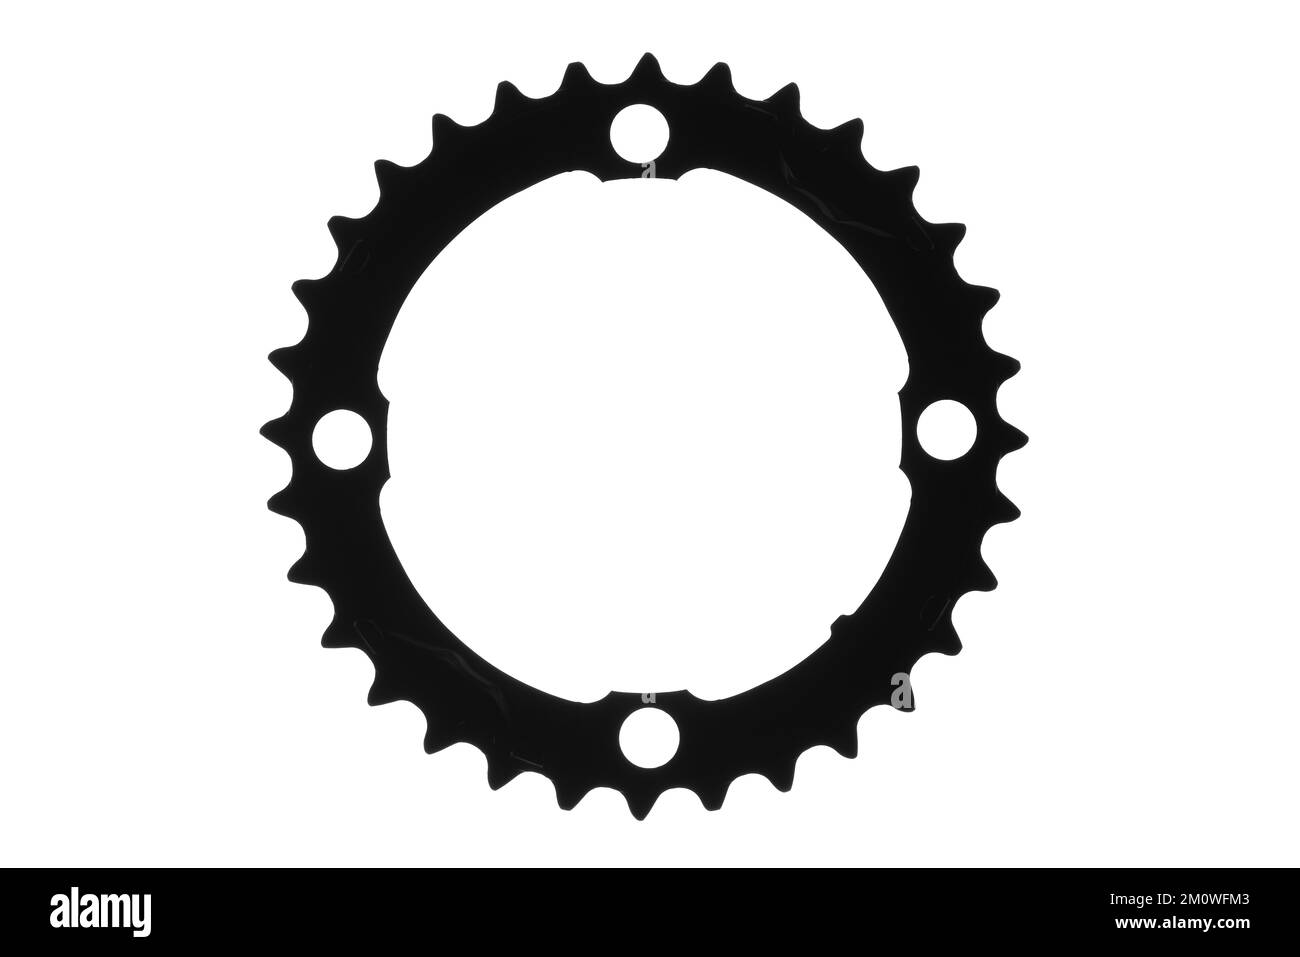 Bicycle gear isolated on white background Stock Photo